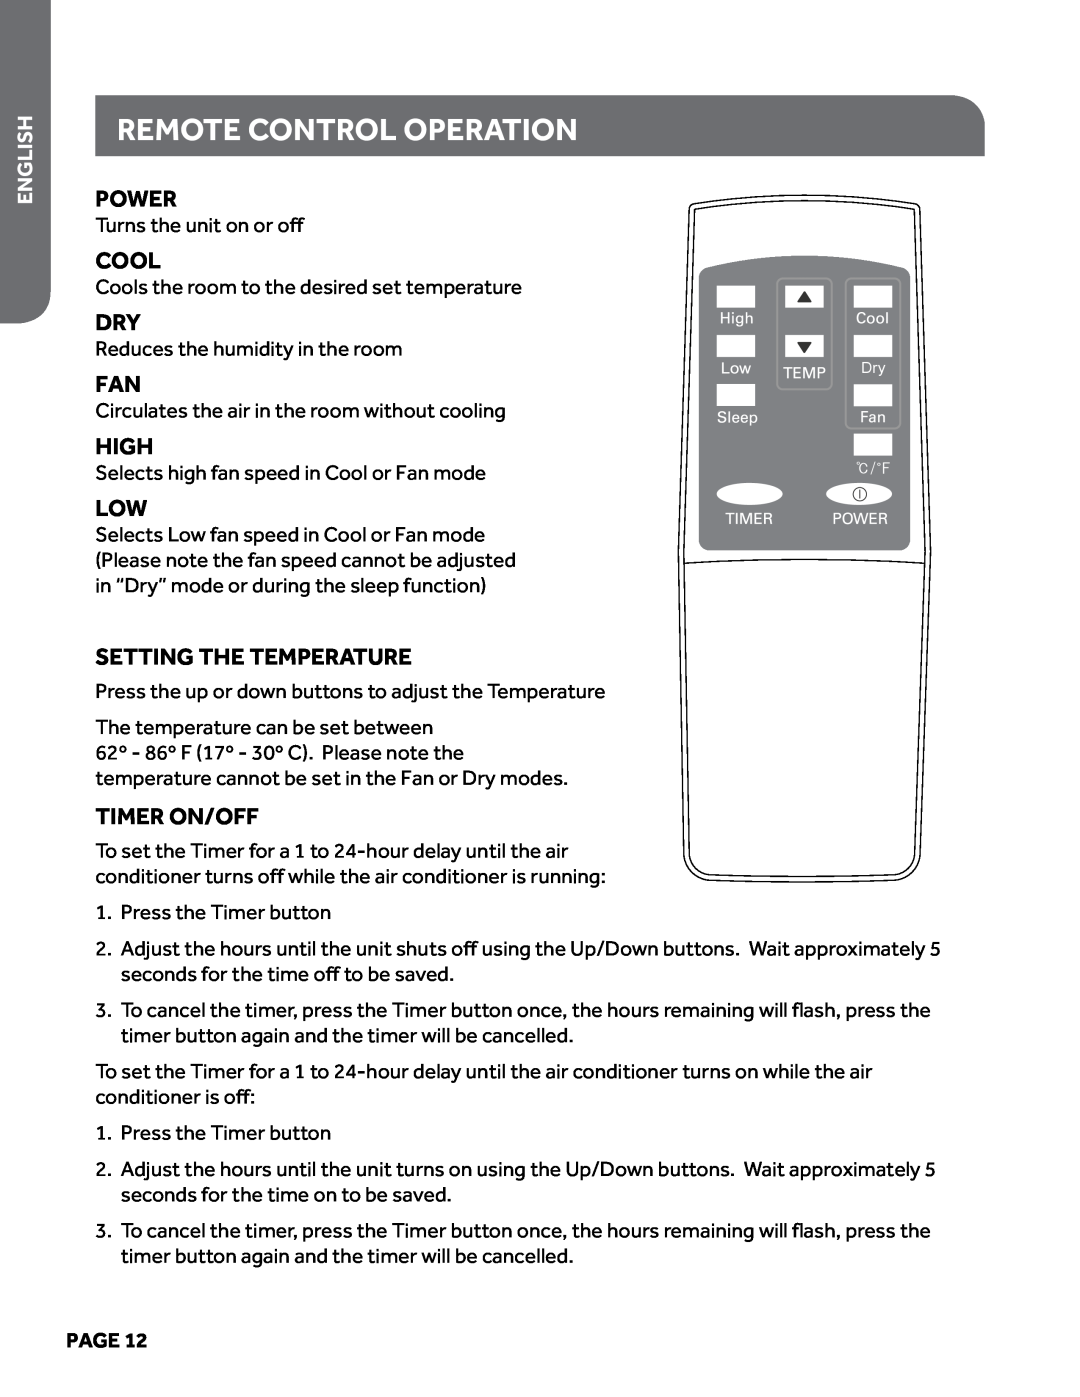 Haier HPY08XCM manual remote control operation, Power, Cool, High, Setting the Temperature, Timer On/Off, English, Page 